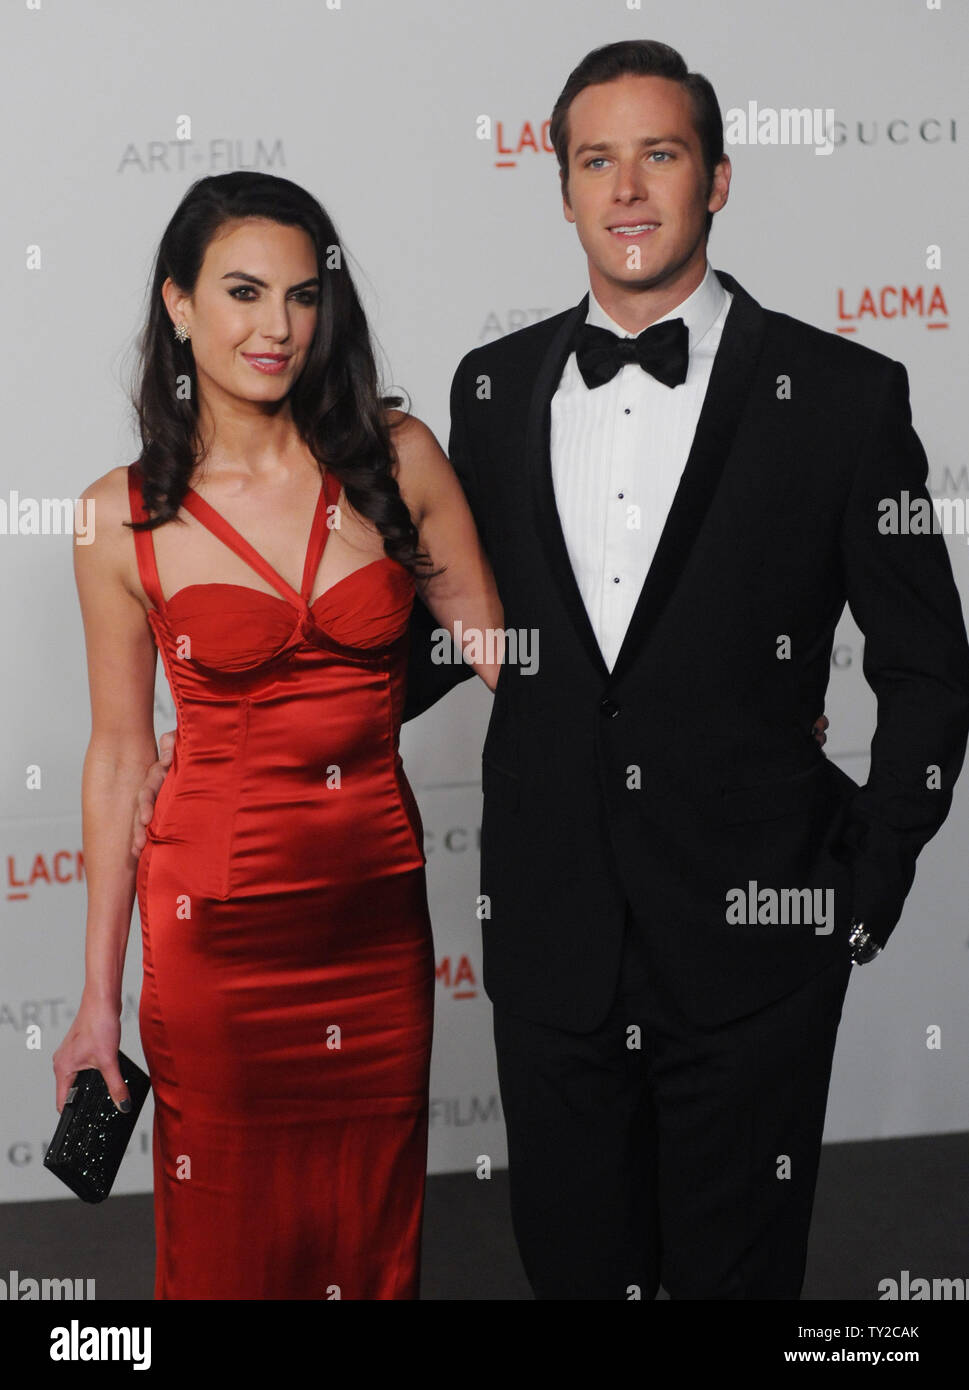 Actor Armie Hammer and Elizabeth Chambers attend the LACMA Art + Film gala honoring Clint Eastwood and John Baldessari at the Los Angeles County Museum of Art in Los Angeles on November 5, 2011.   UPI/Jim Ruymen Stock Photo